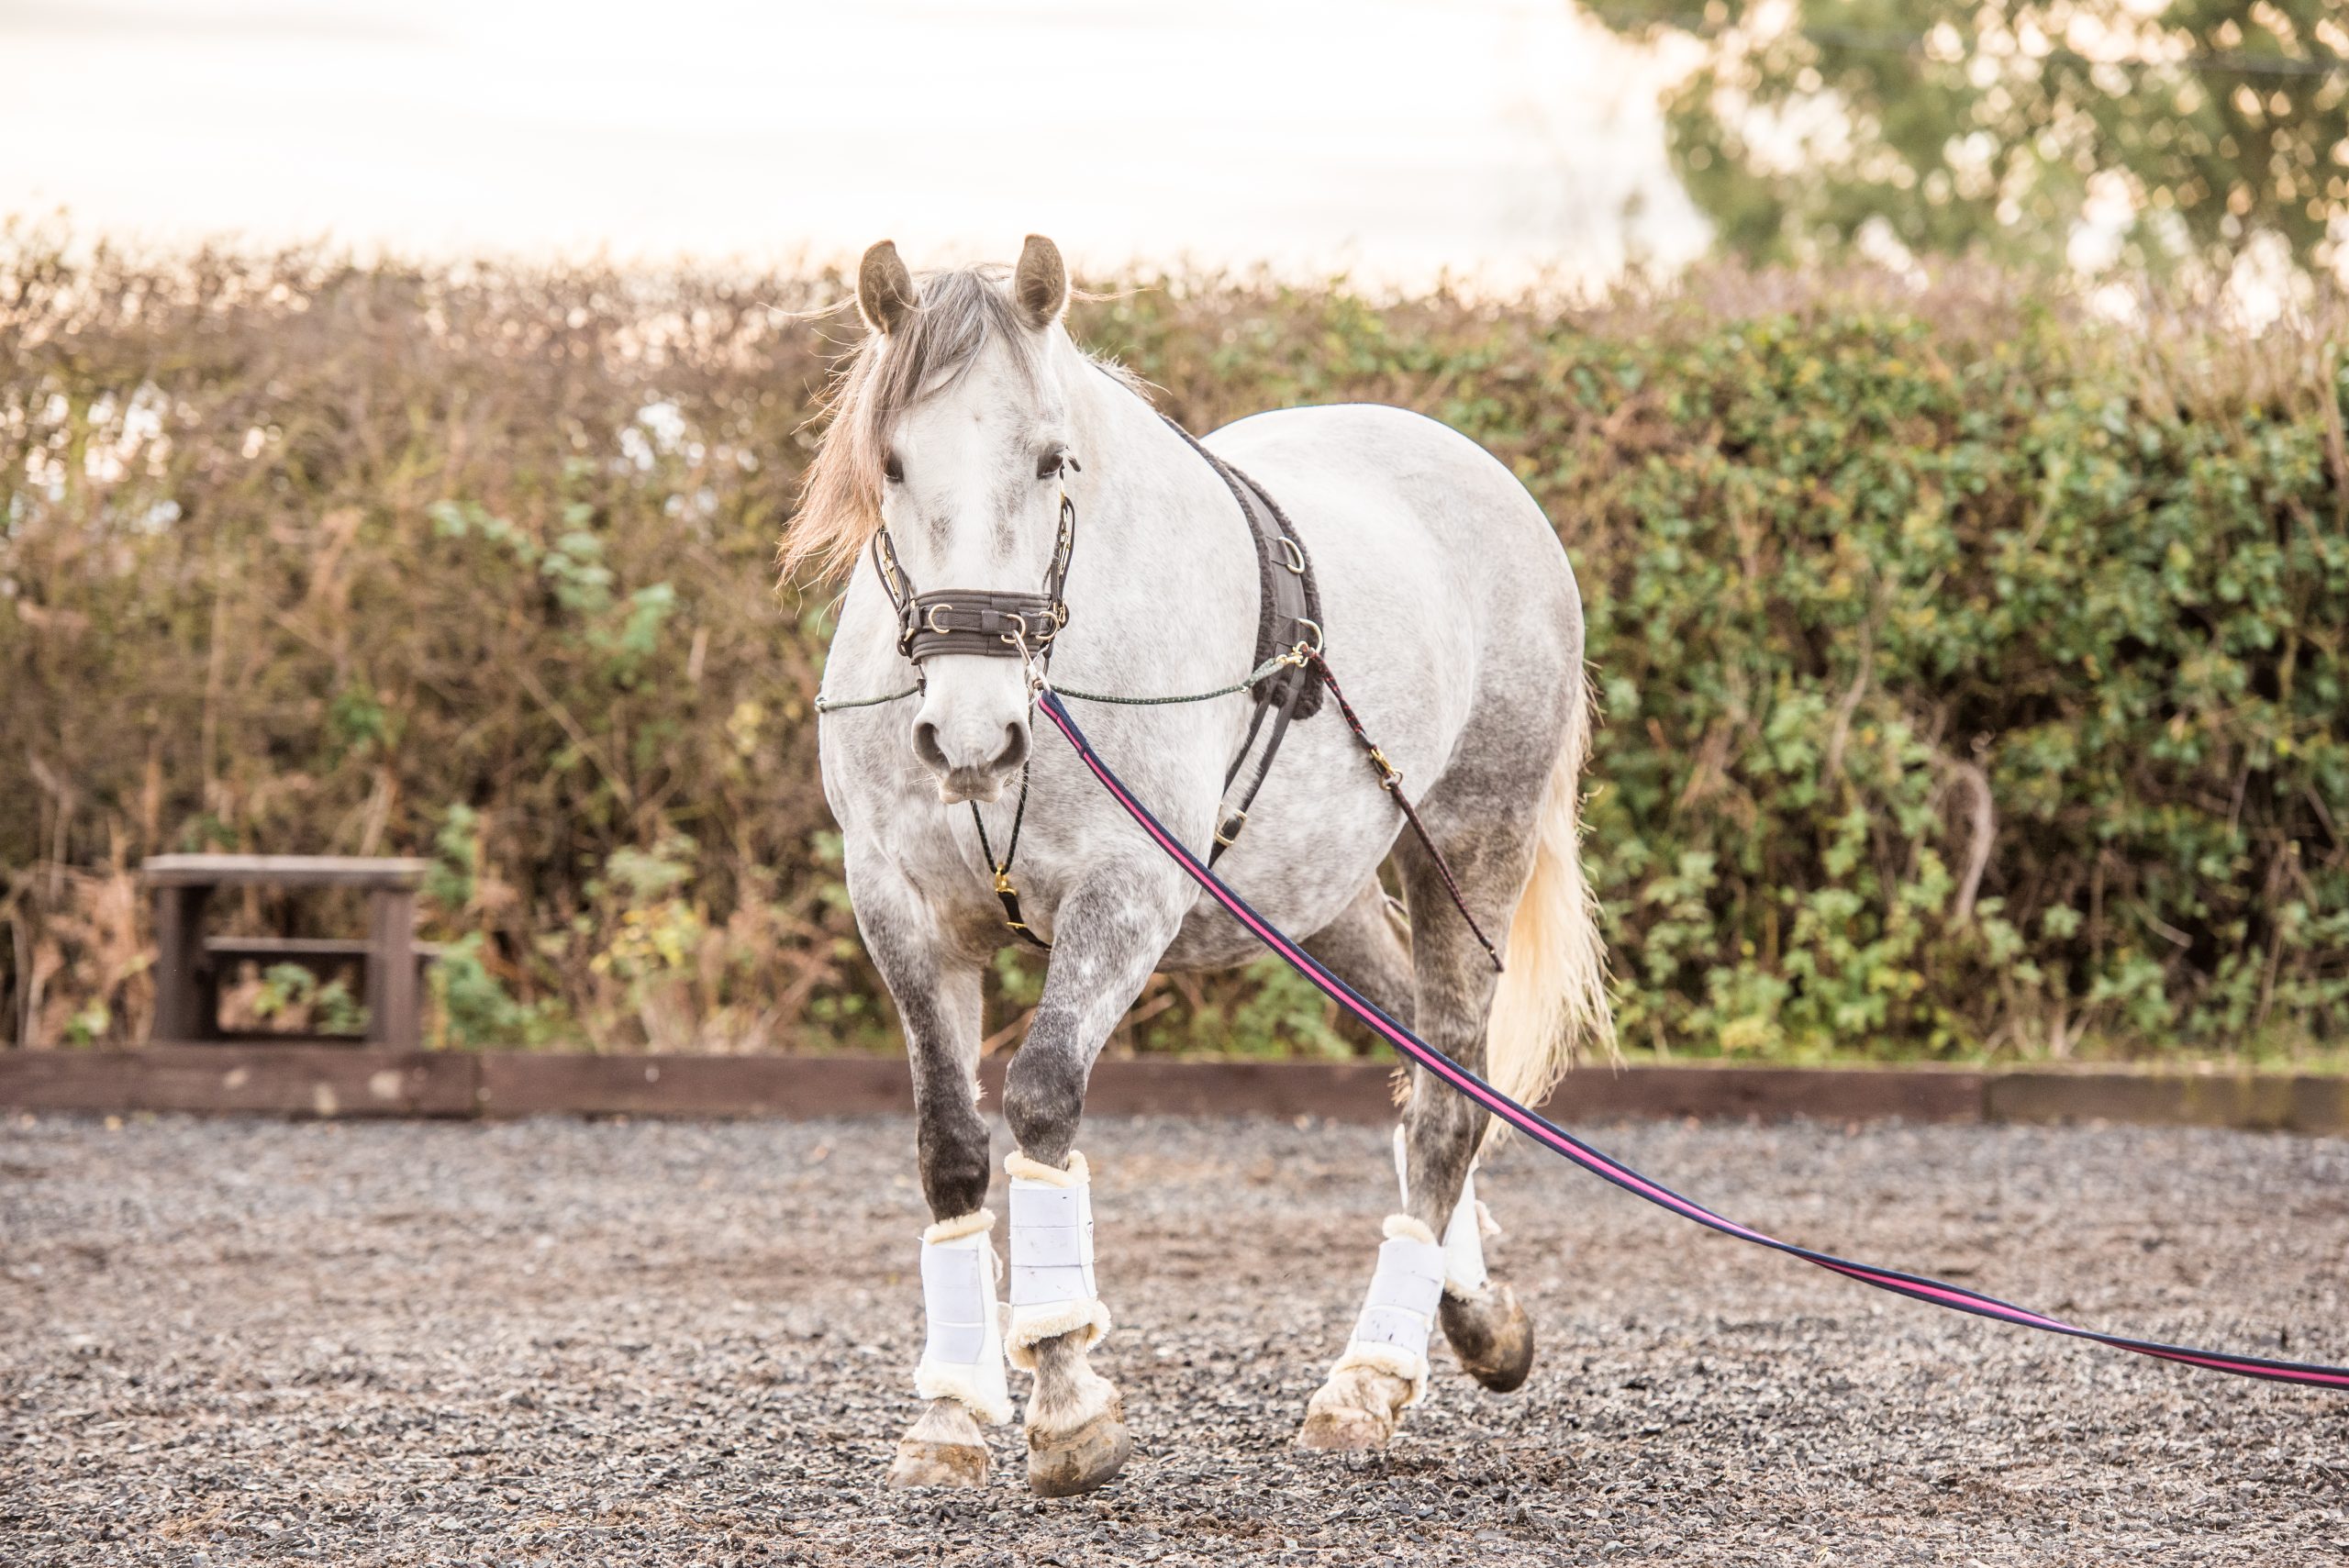 Top tips to help you troubleshoot common lunging issues.